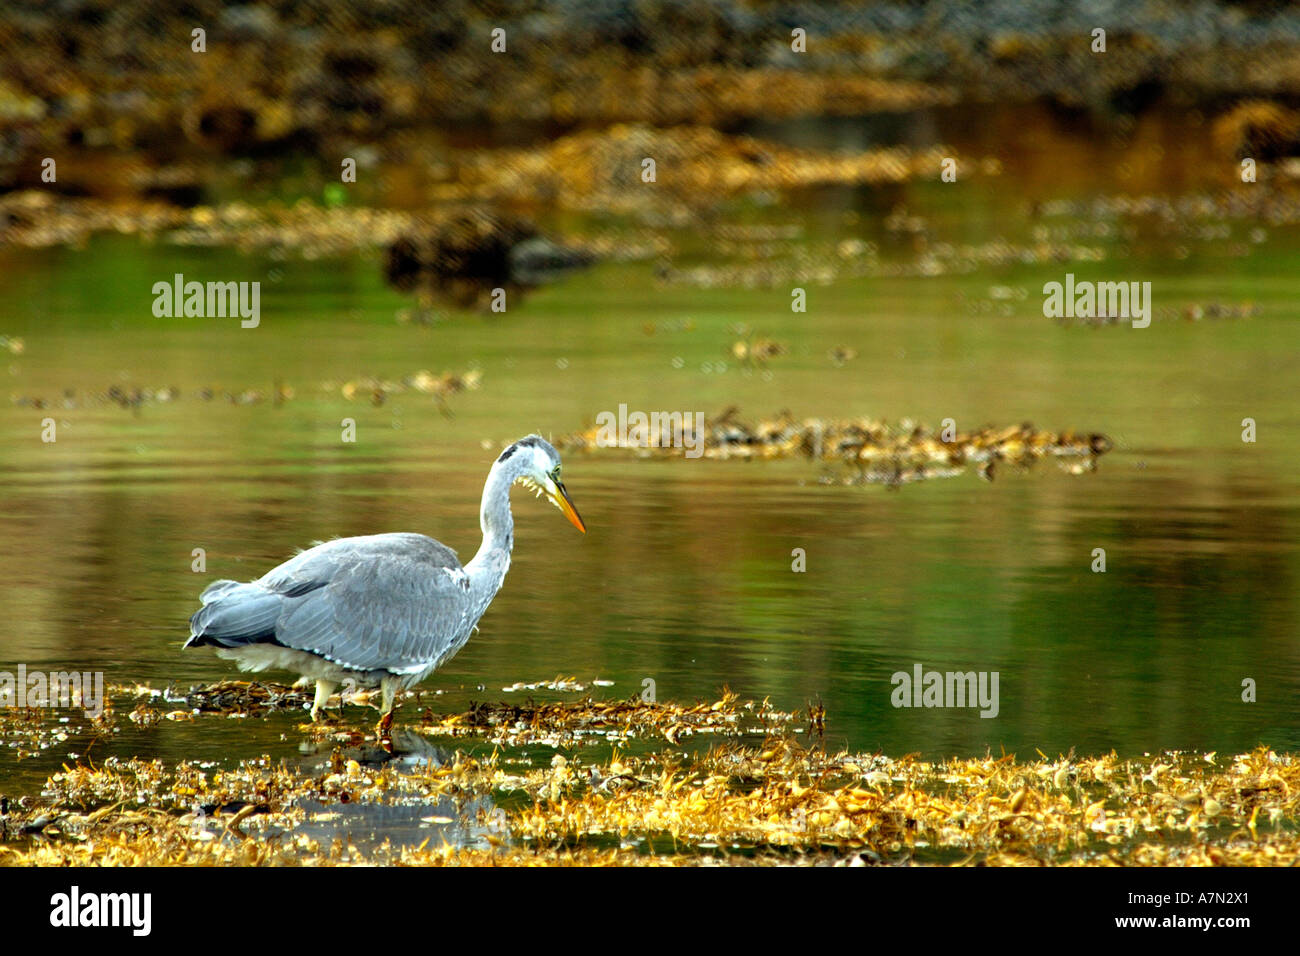 Nice clear highly saturated image of Grey Heron wading in shallow water hunting for prey Stock Photo